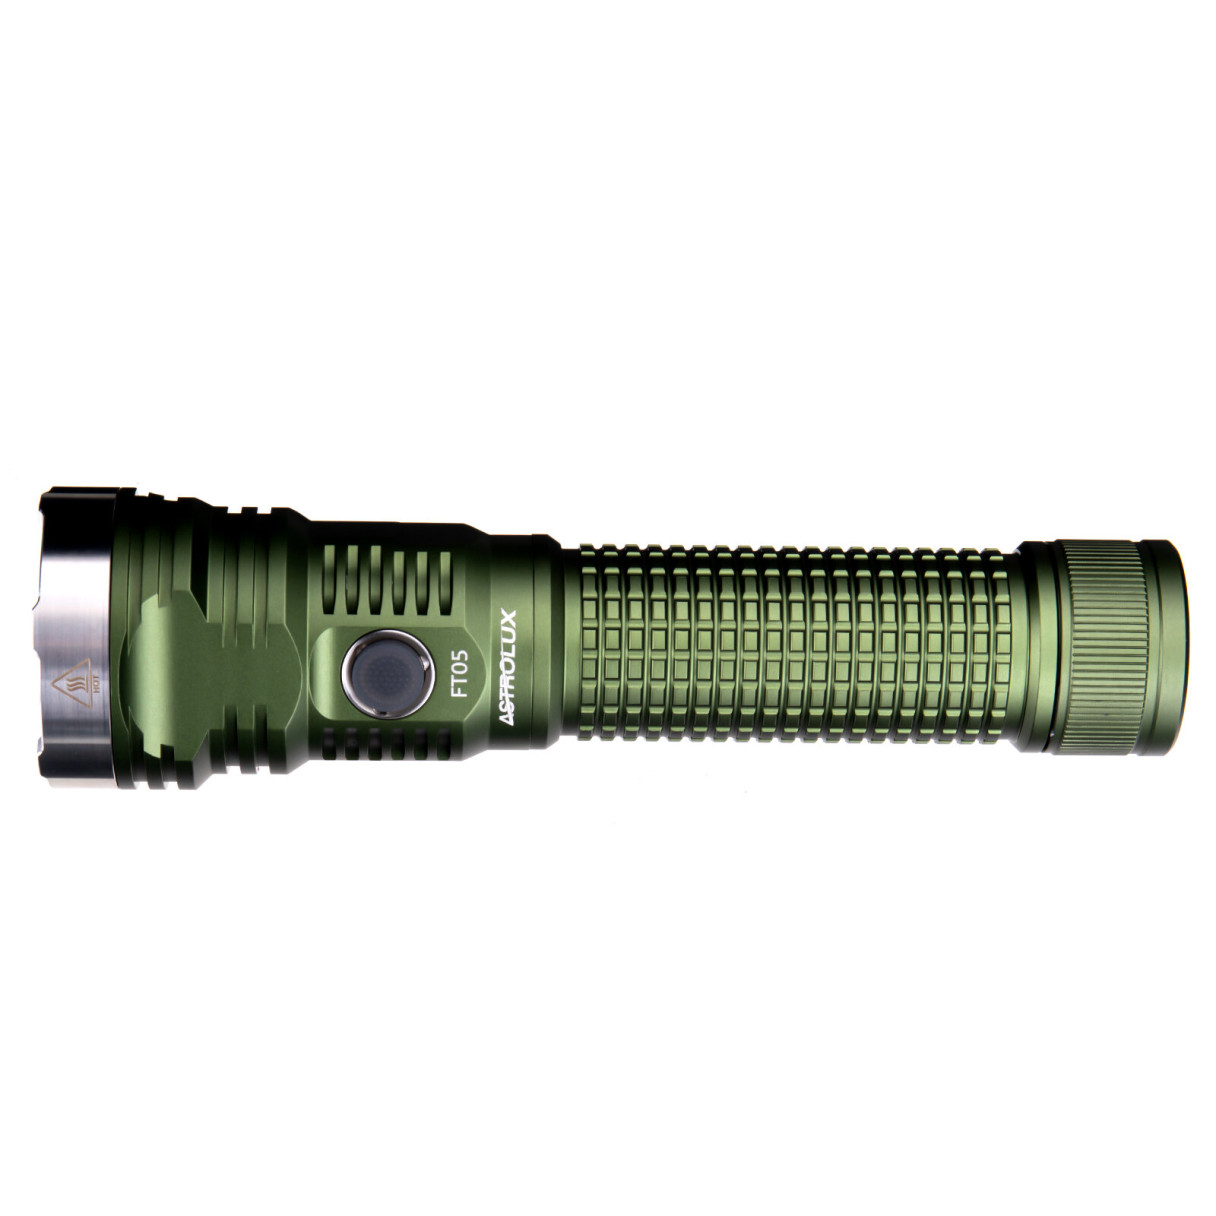 Astrolux® FT05 3050LM 711M Long Throw LED Flashlight With Large Capacity 6000mAh 26980 Battery Type-C Fast Rechargeable Strong LED Torch Outdoor Emergency Phone Power Bank